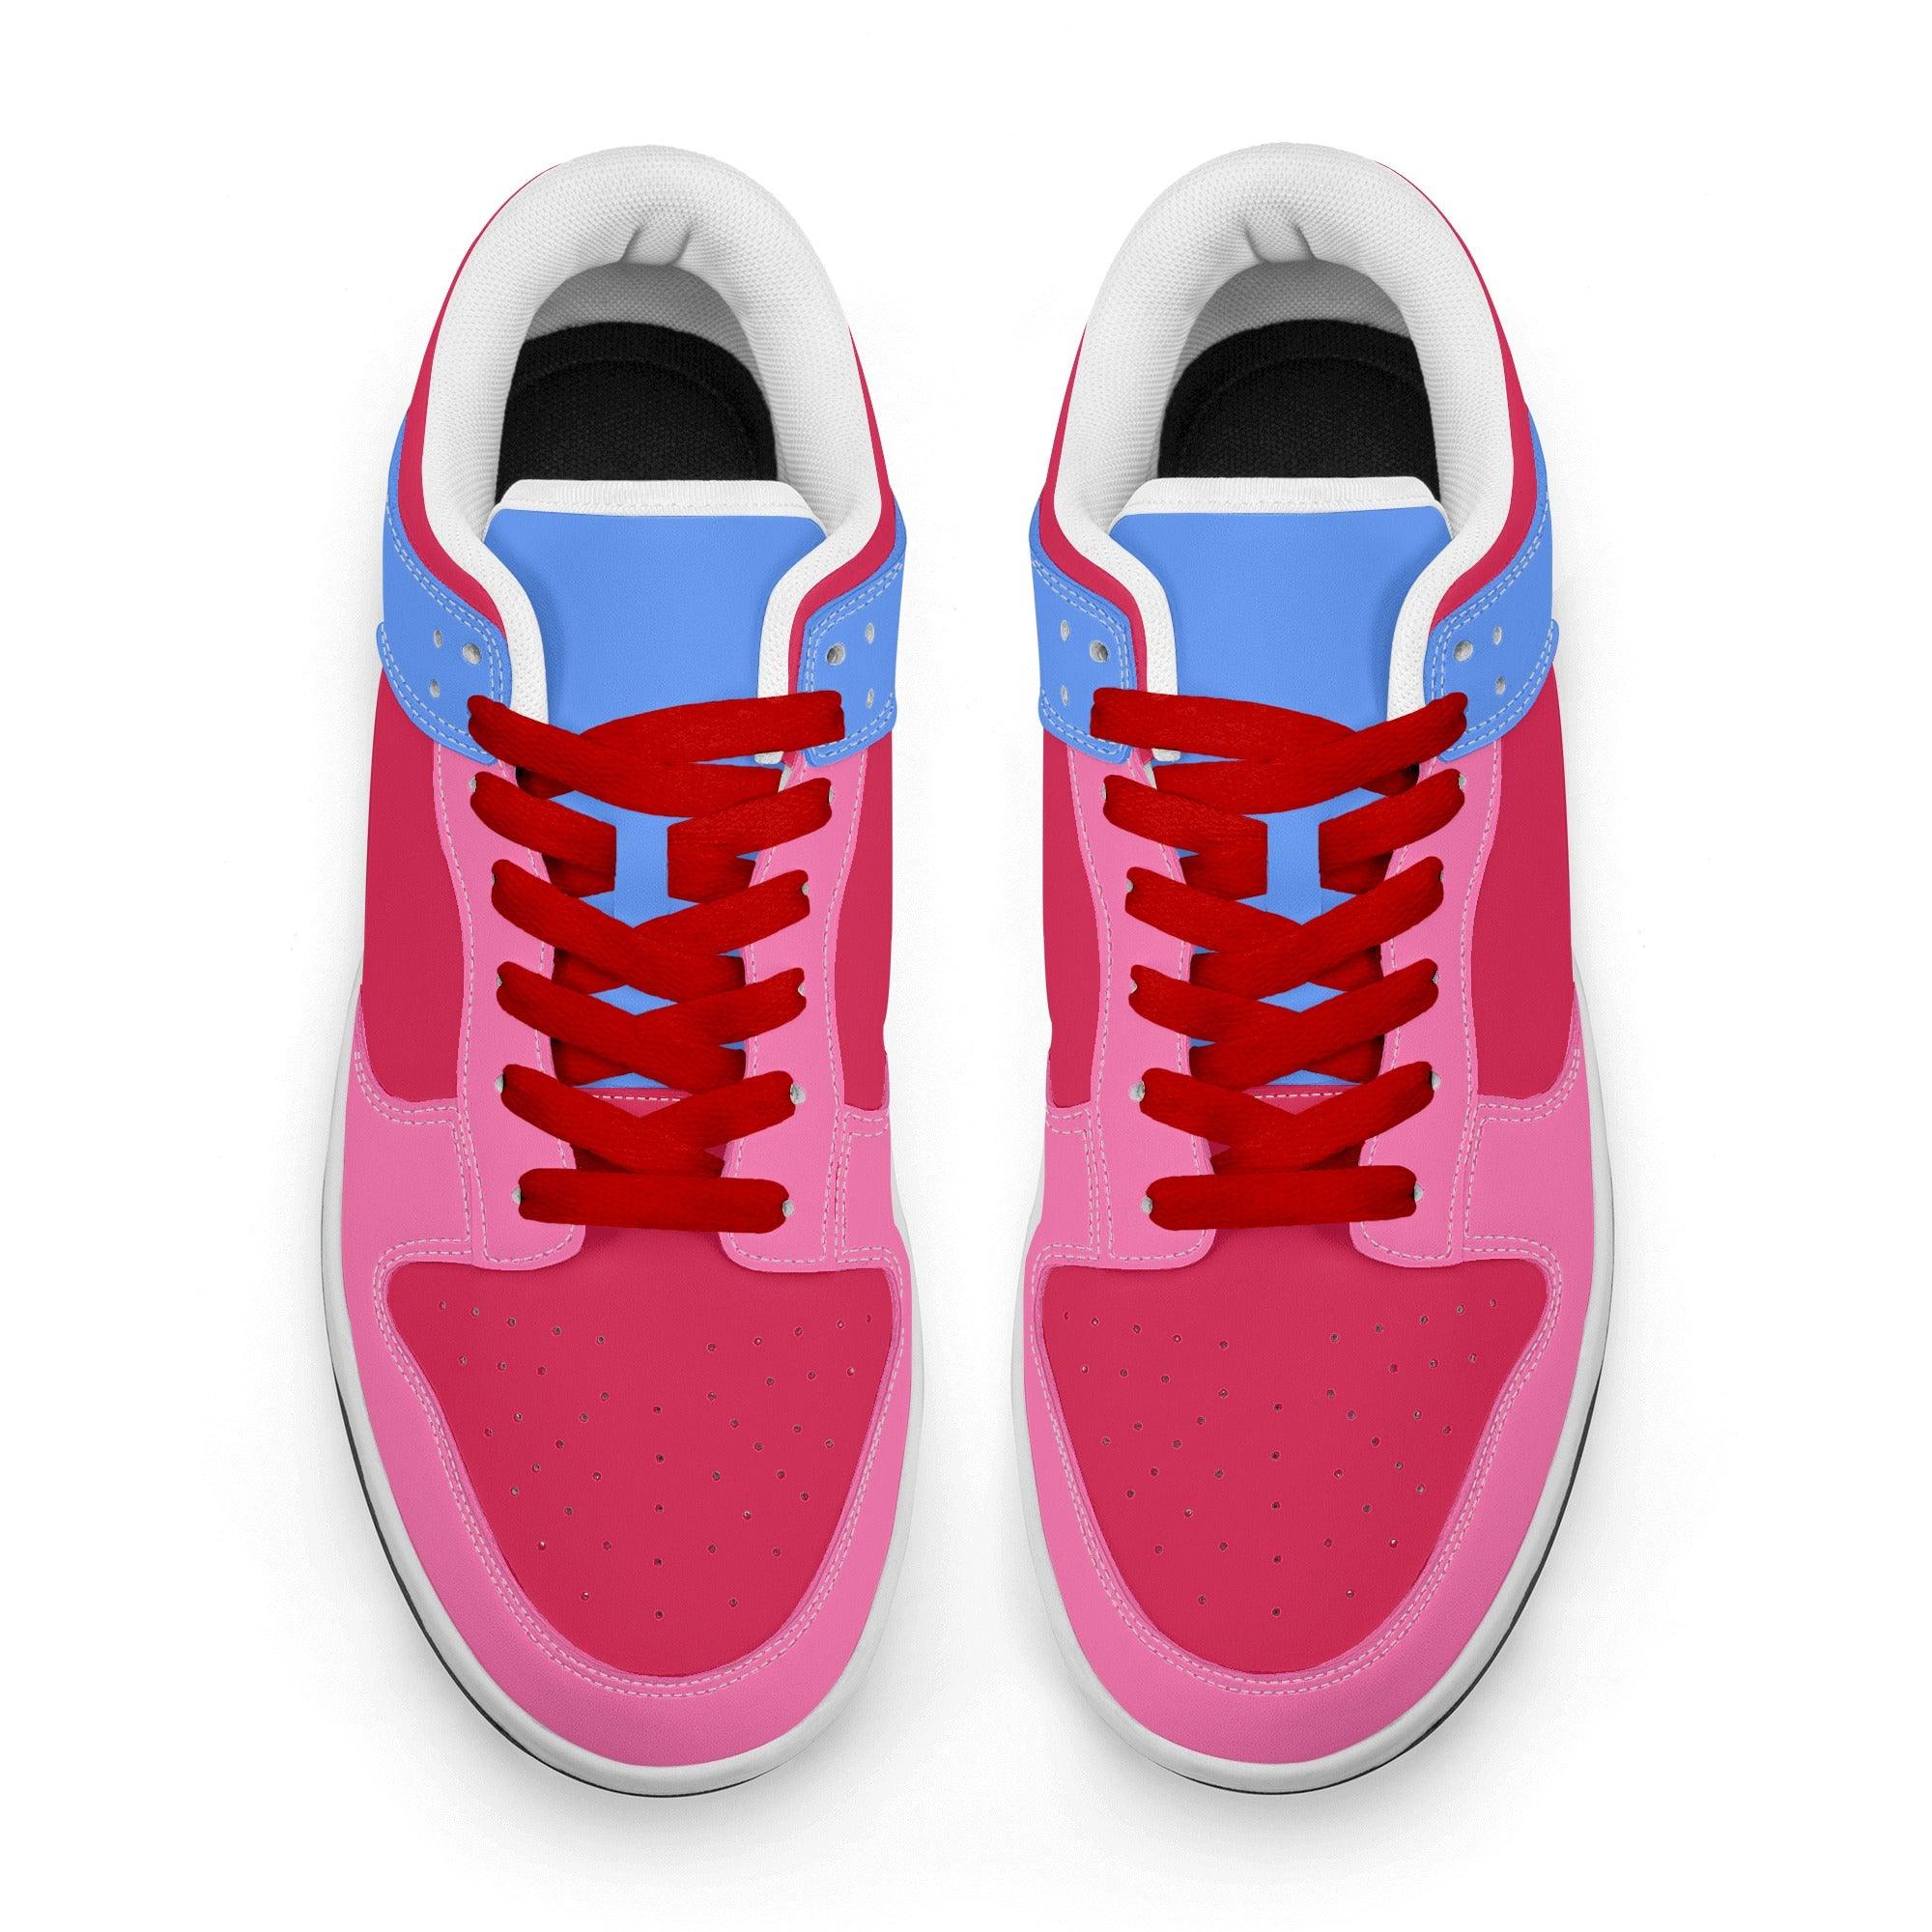 Sechia Tri-color Low Top Sneakers - Pink Red Blue Women's Red Laces Candy Retro Bold Vibrant Color Block Vibrant Coordinate